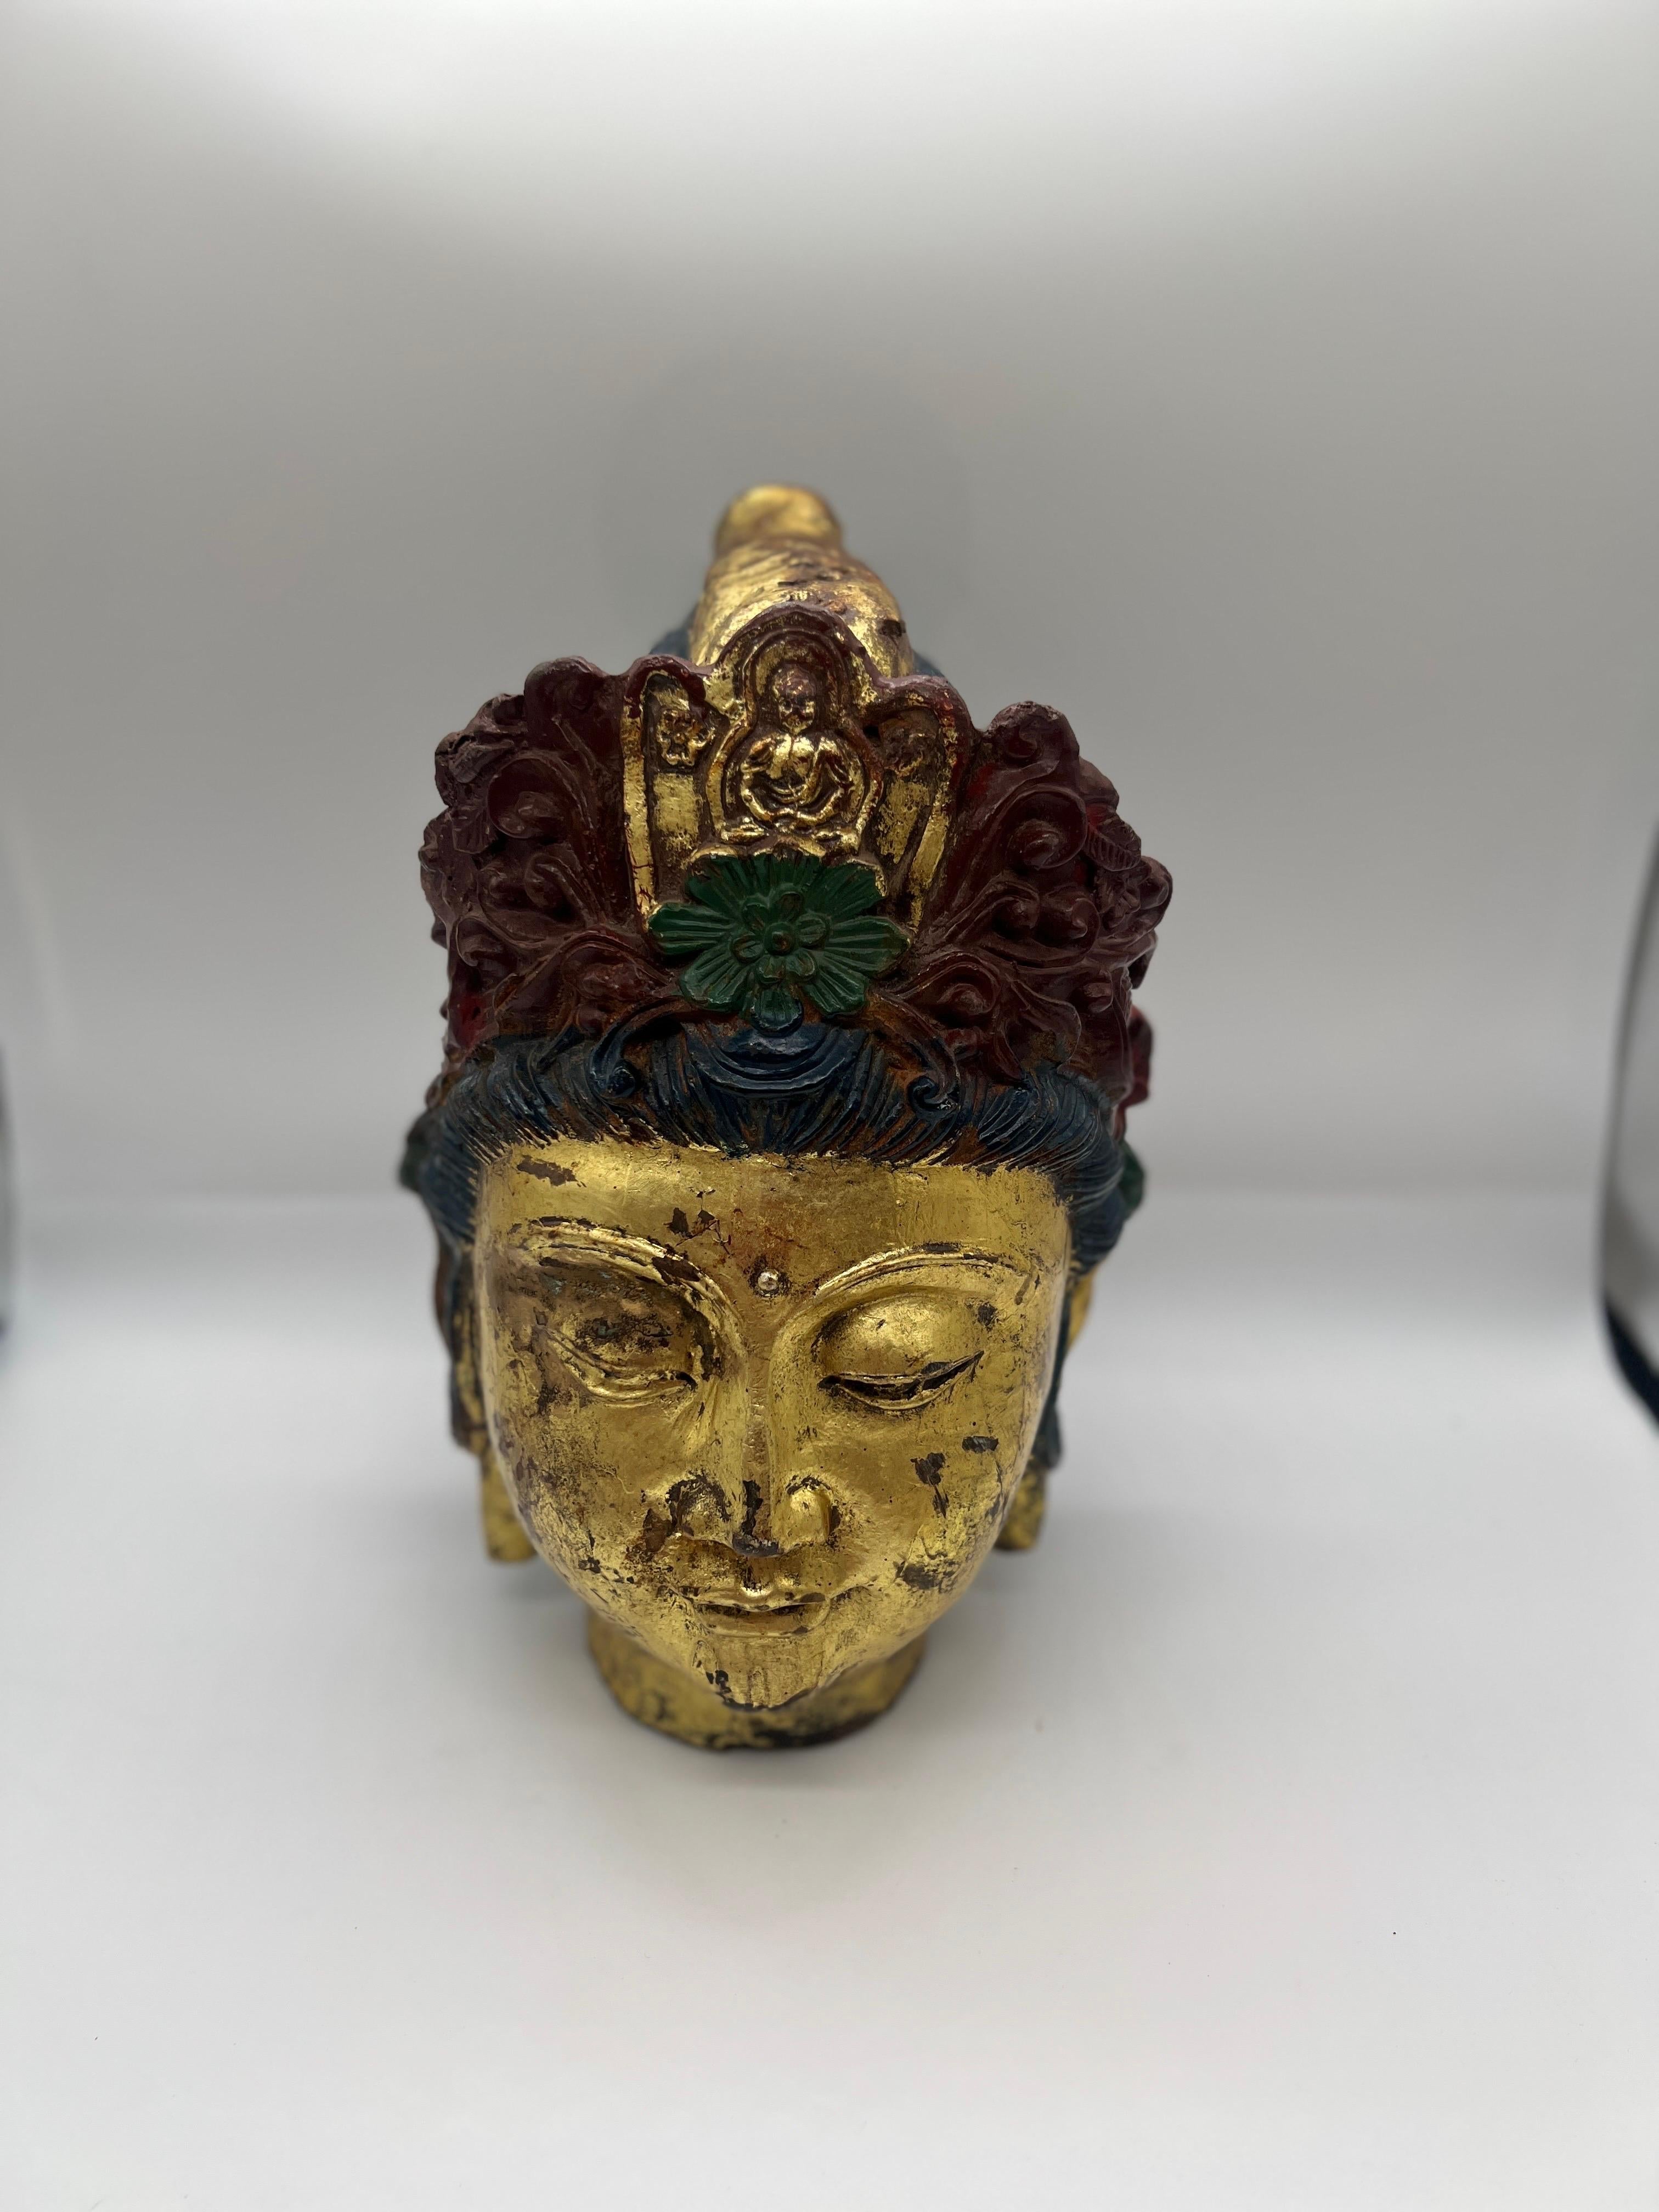 Tibet, 19th century or earlier. 
A heavy and large scale buddha head made of cast iron. The head features antique gold leaf surface and some old polychrome paint (some paint appears to be added).